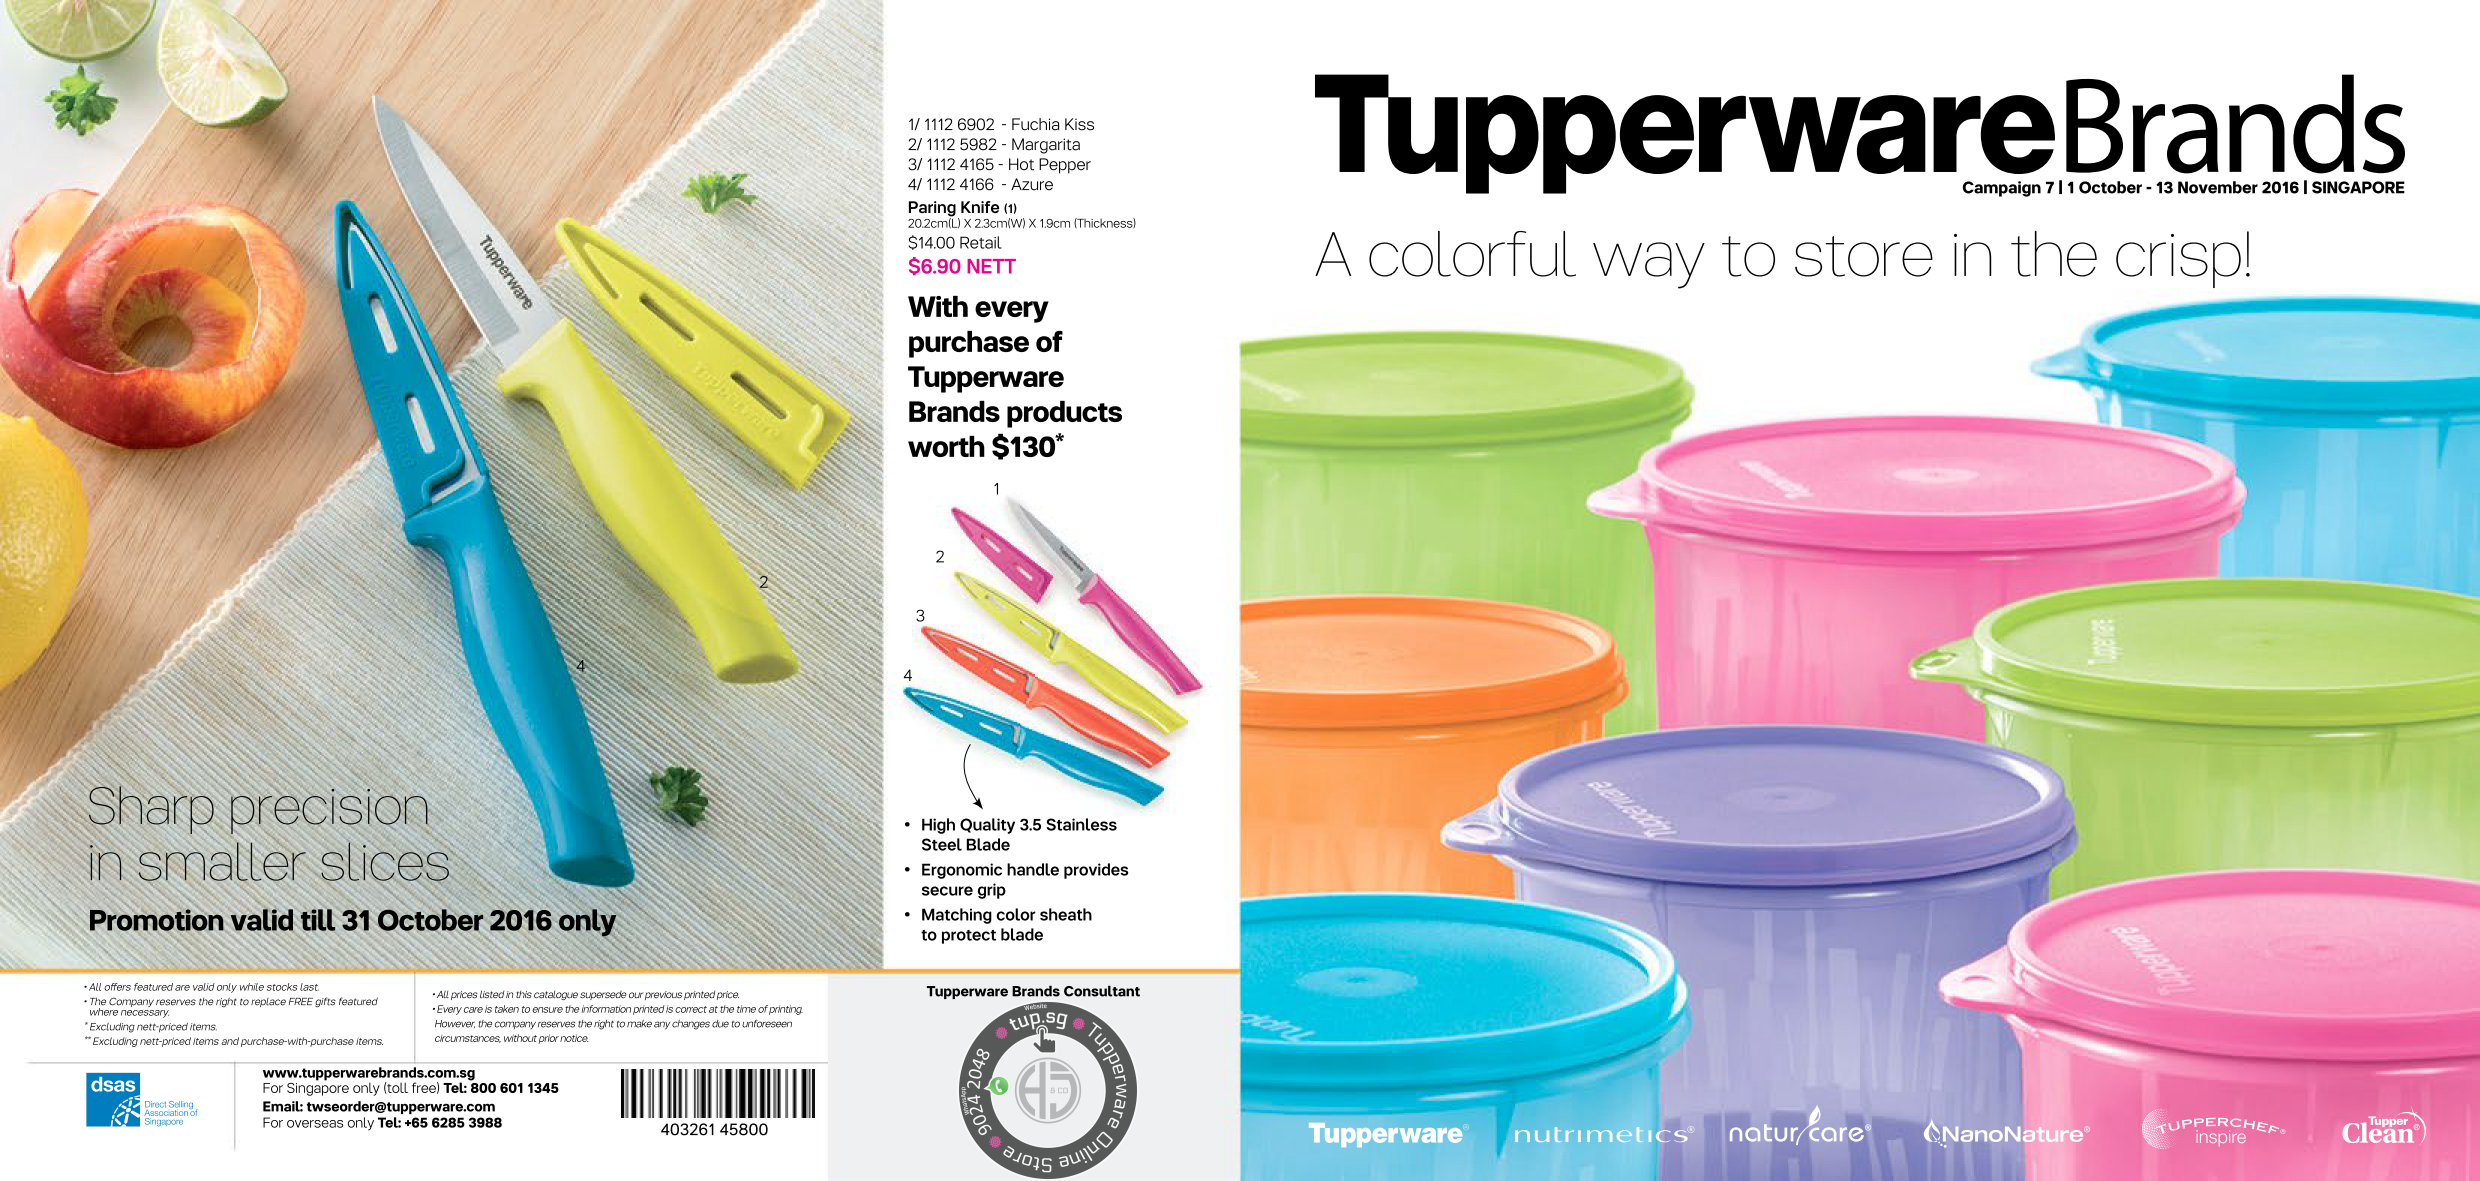 Who Invented Tupperware